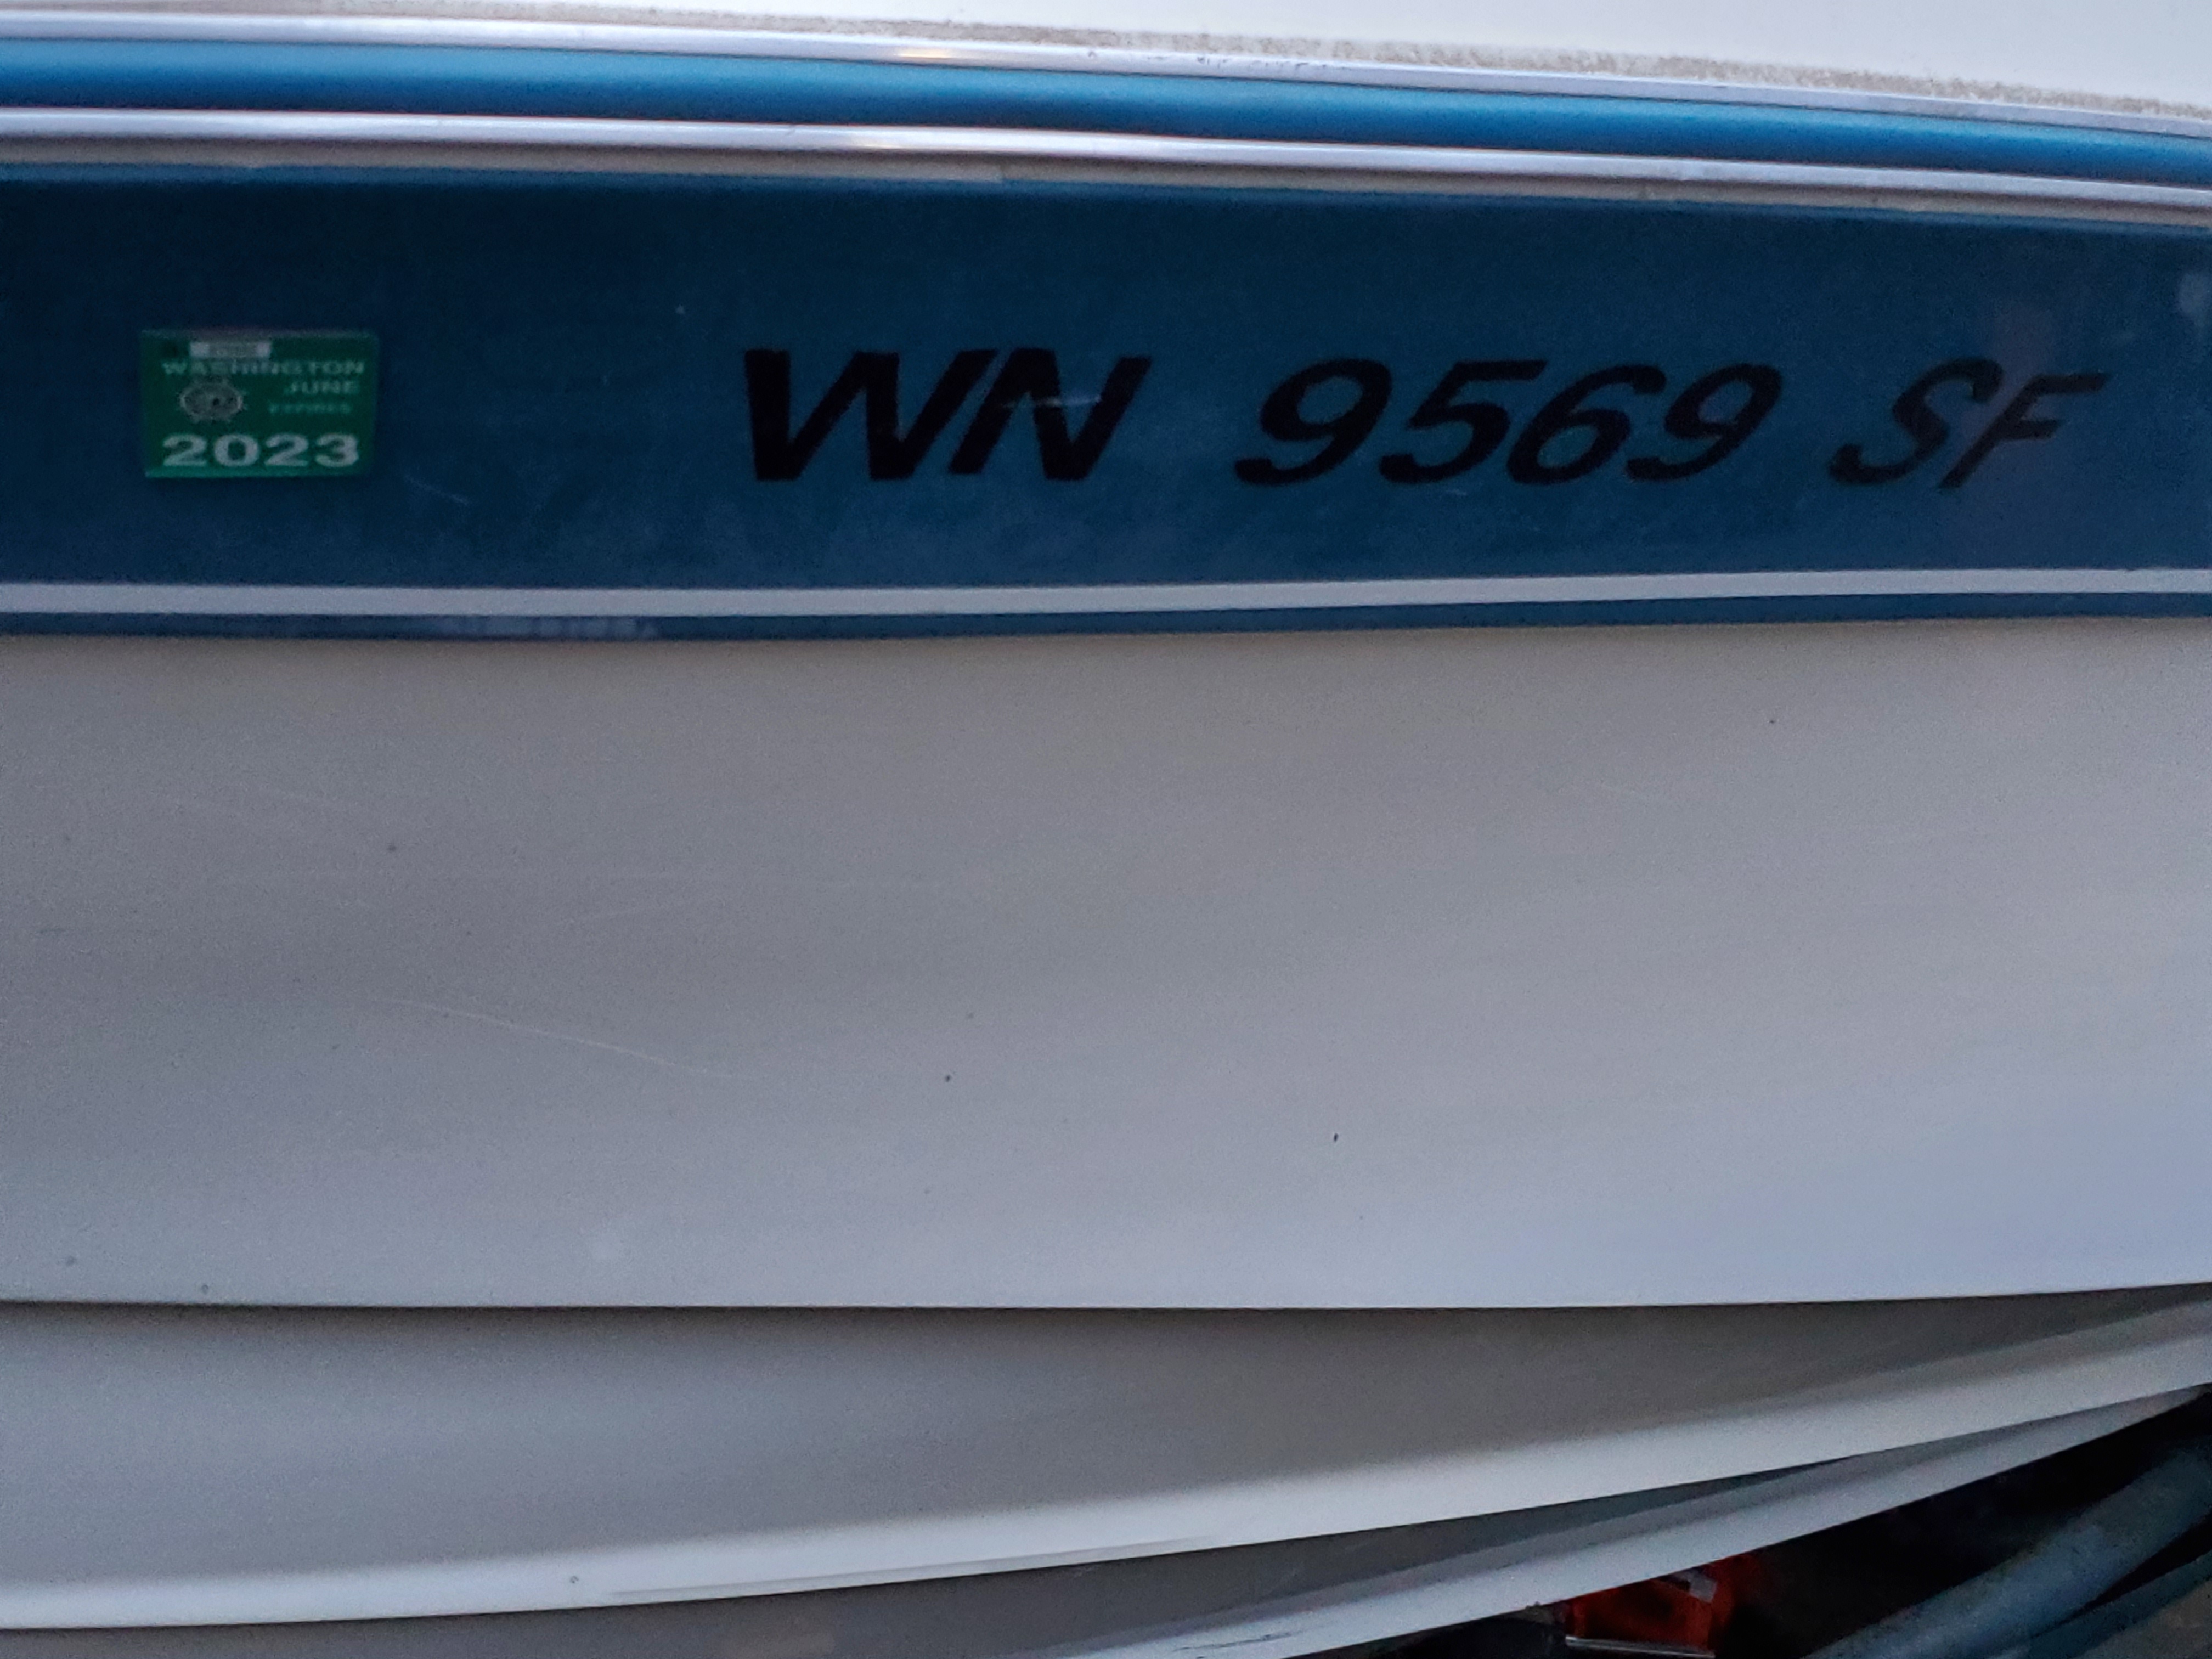 1978 19 foot Cobalt FGE Power boat for sale in Burien, WA - image 2 